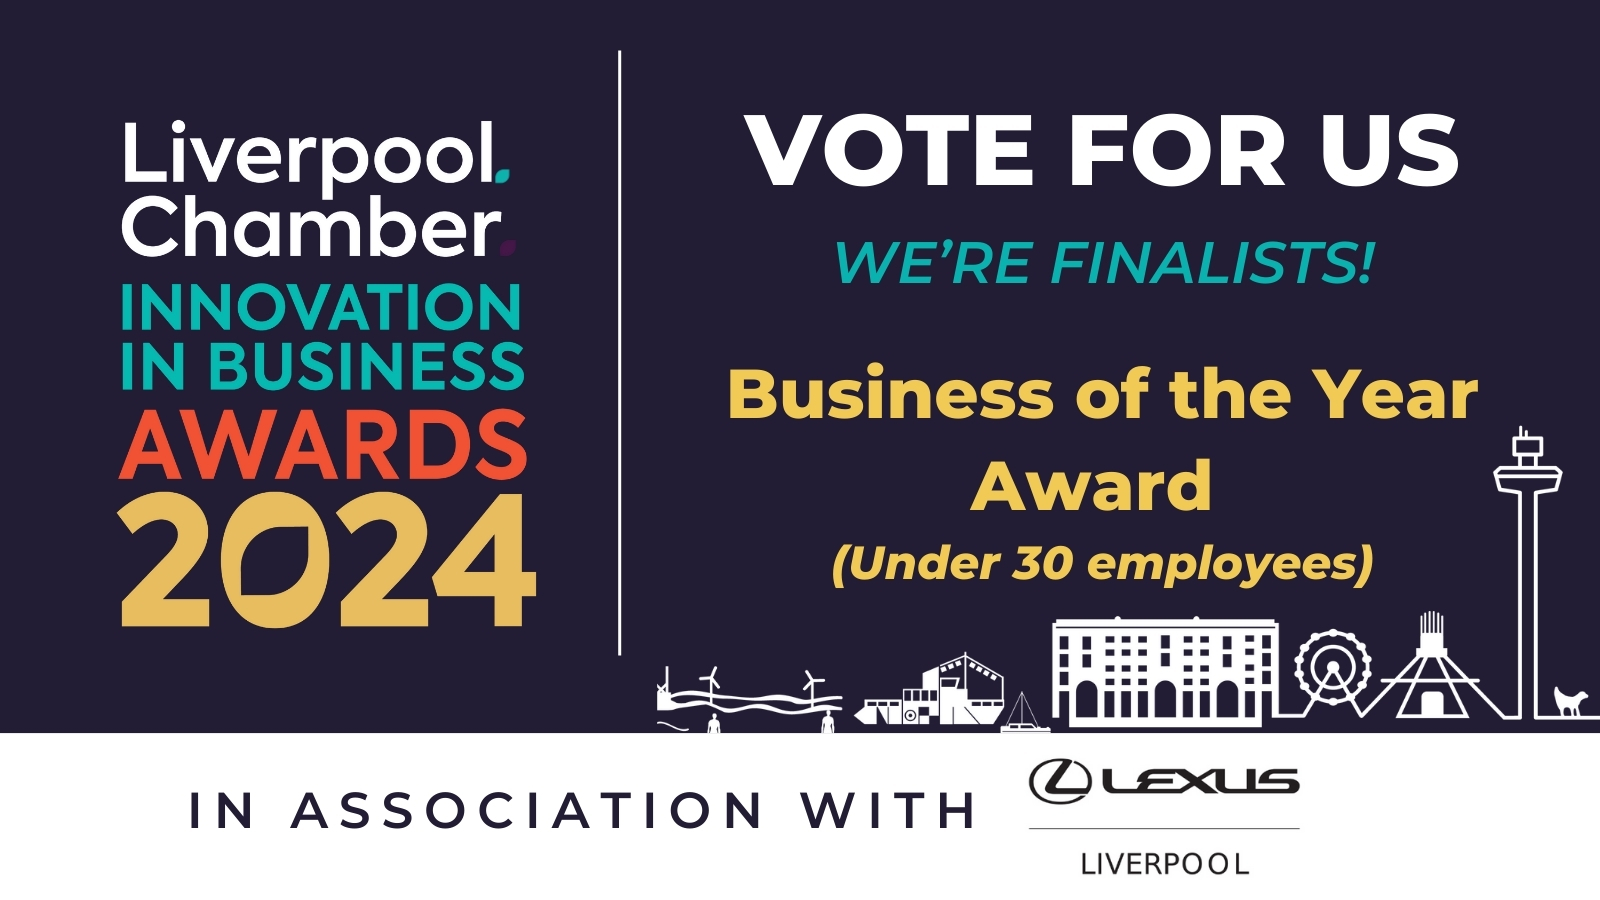 Liverpool Chamber of Commerce - Innovation in Business Awards 2024 - Finalist